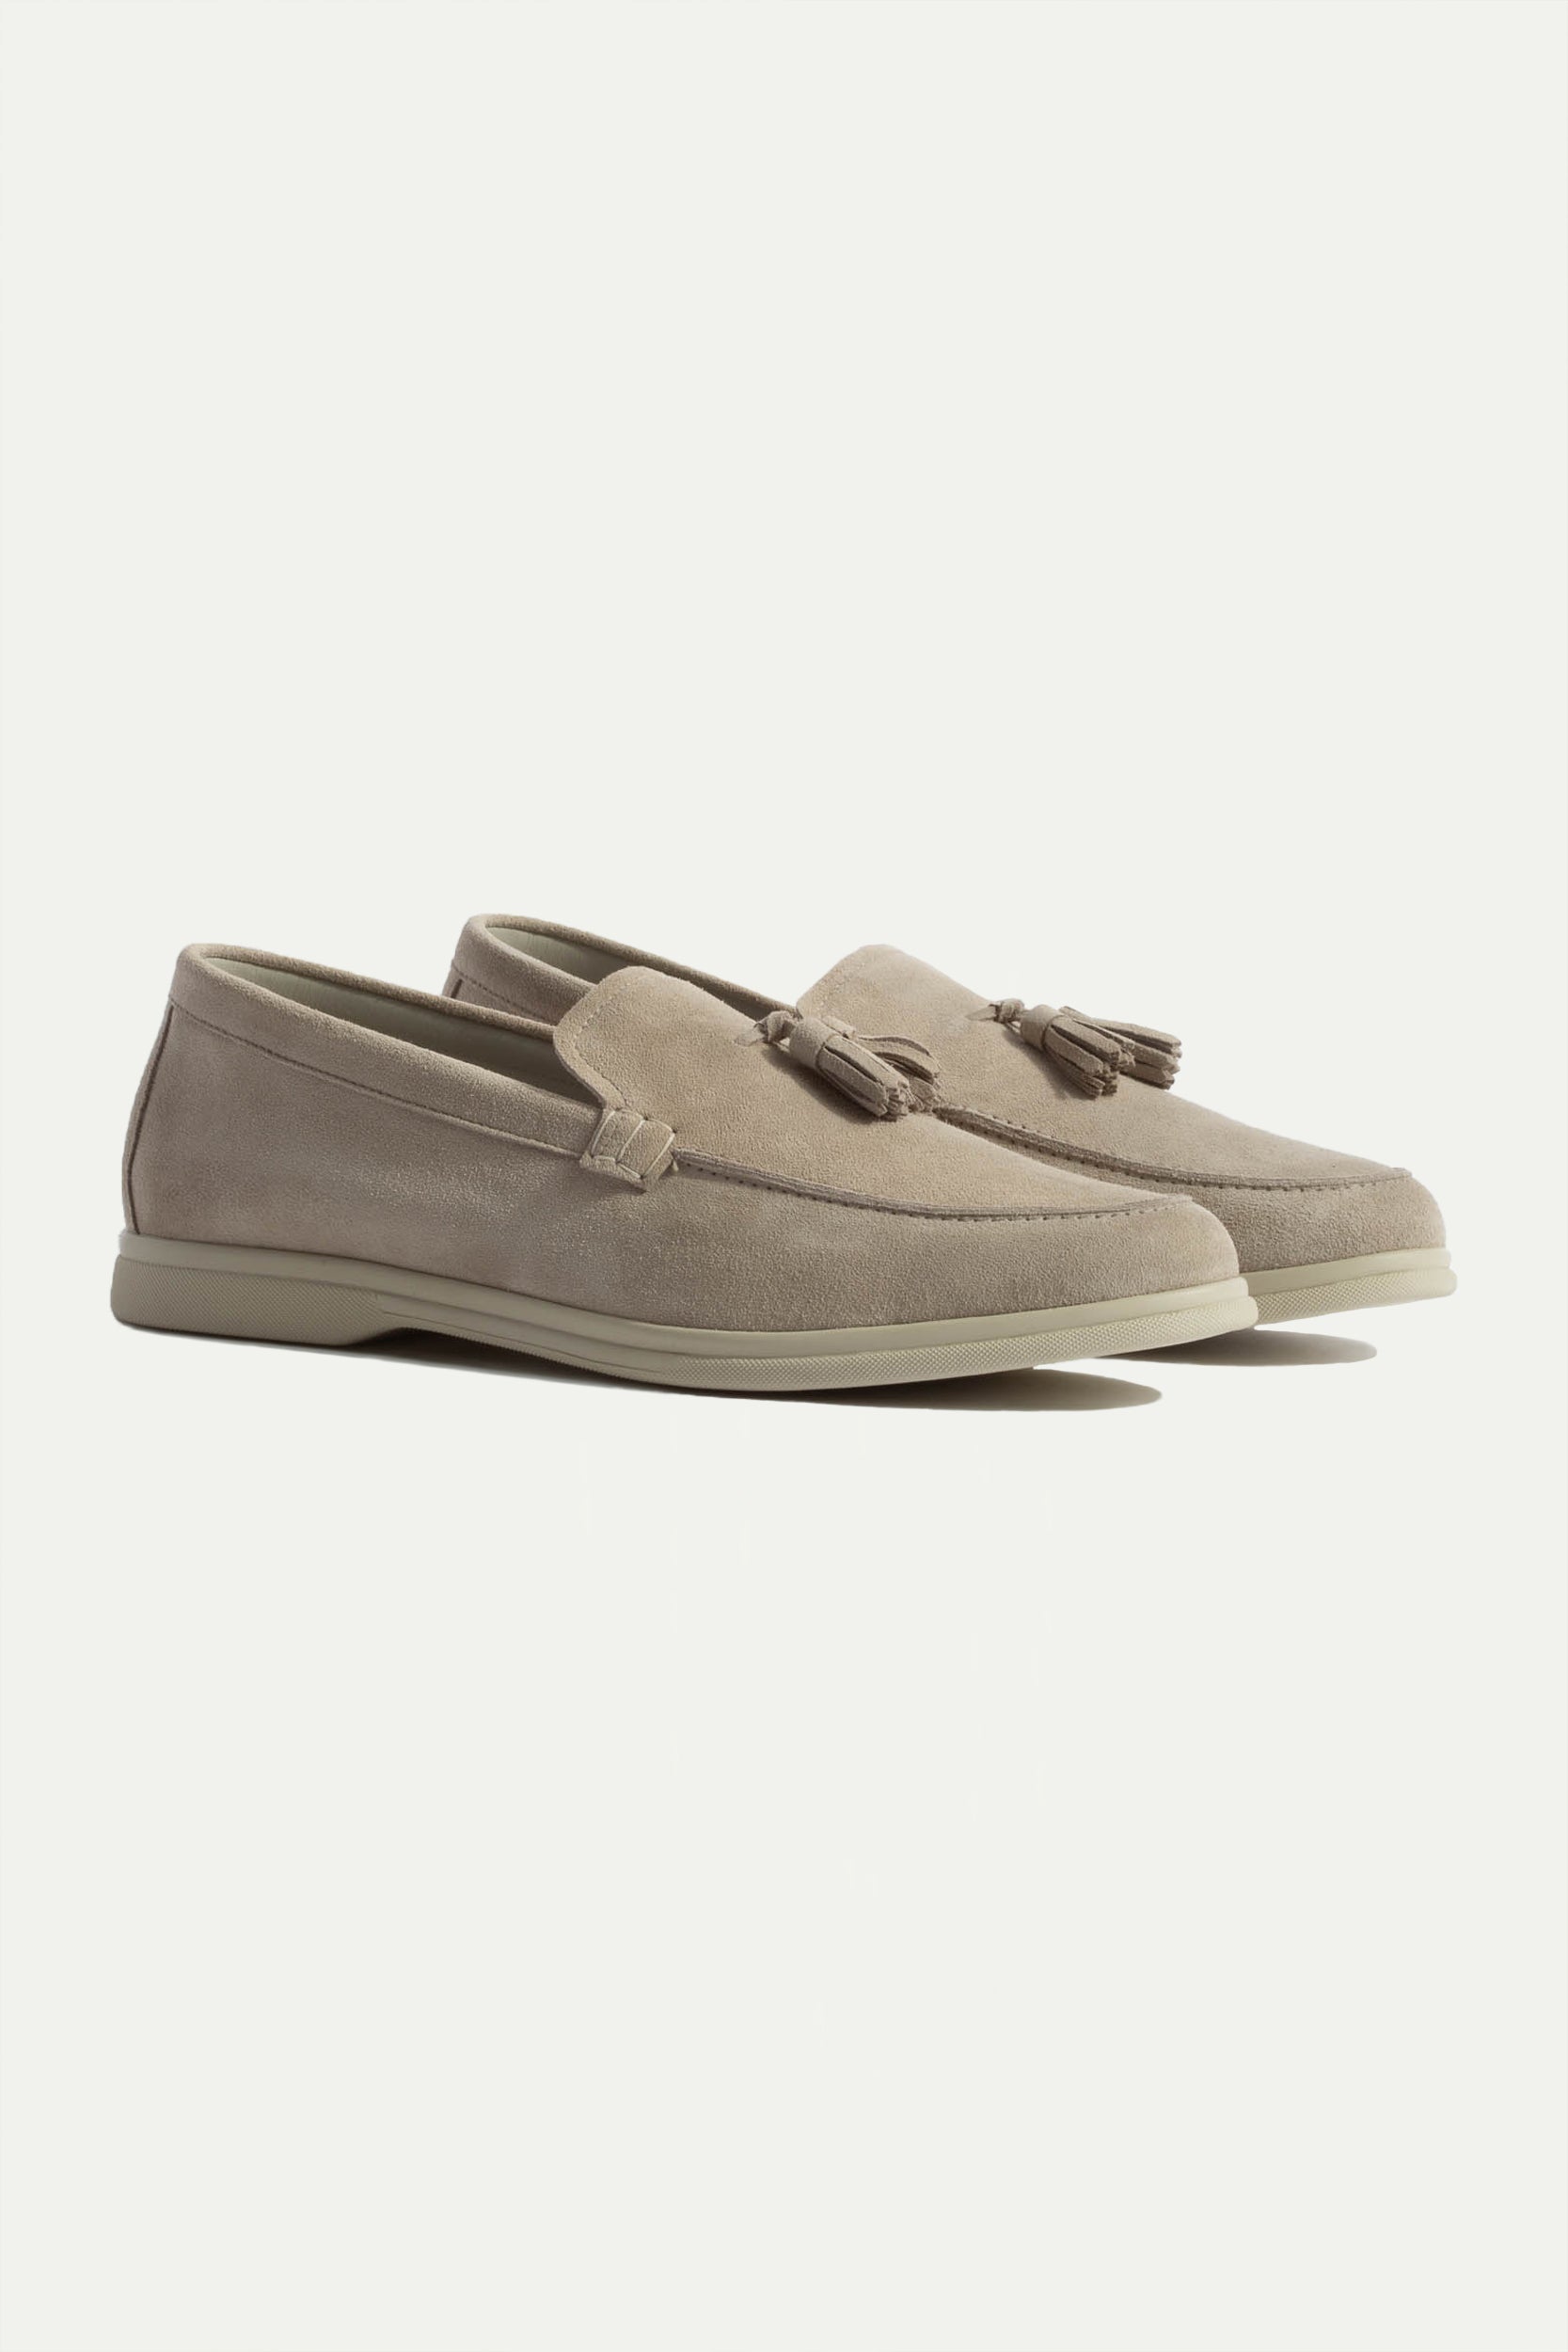 Sand suede tassel loafers - Made In Italy